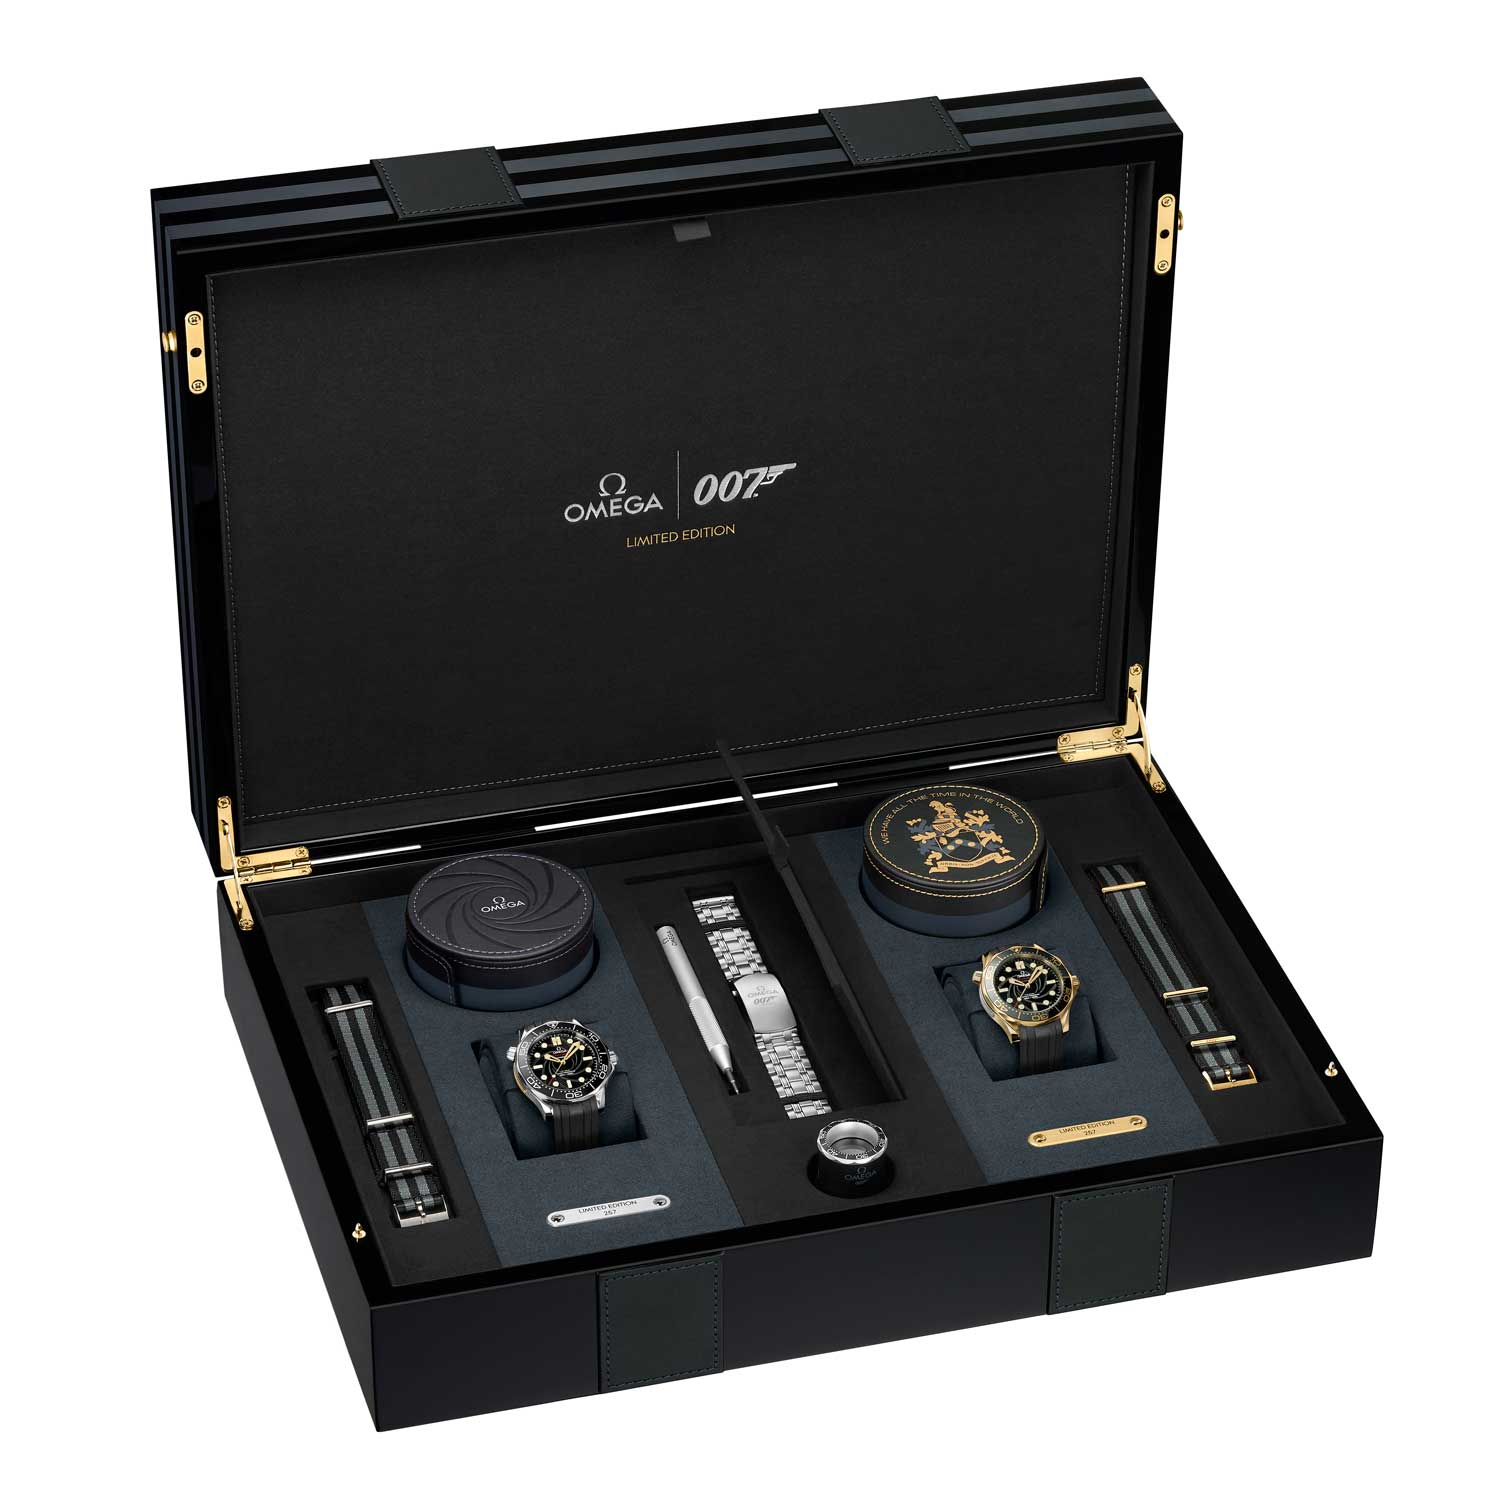 OMEGA James Bond Limited Edition Set including the 42mm stainless steel and 18K yellow gold Seamaster Diver 300M watches